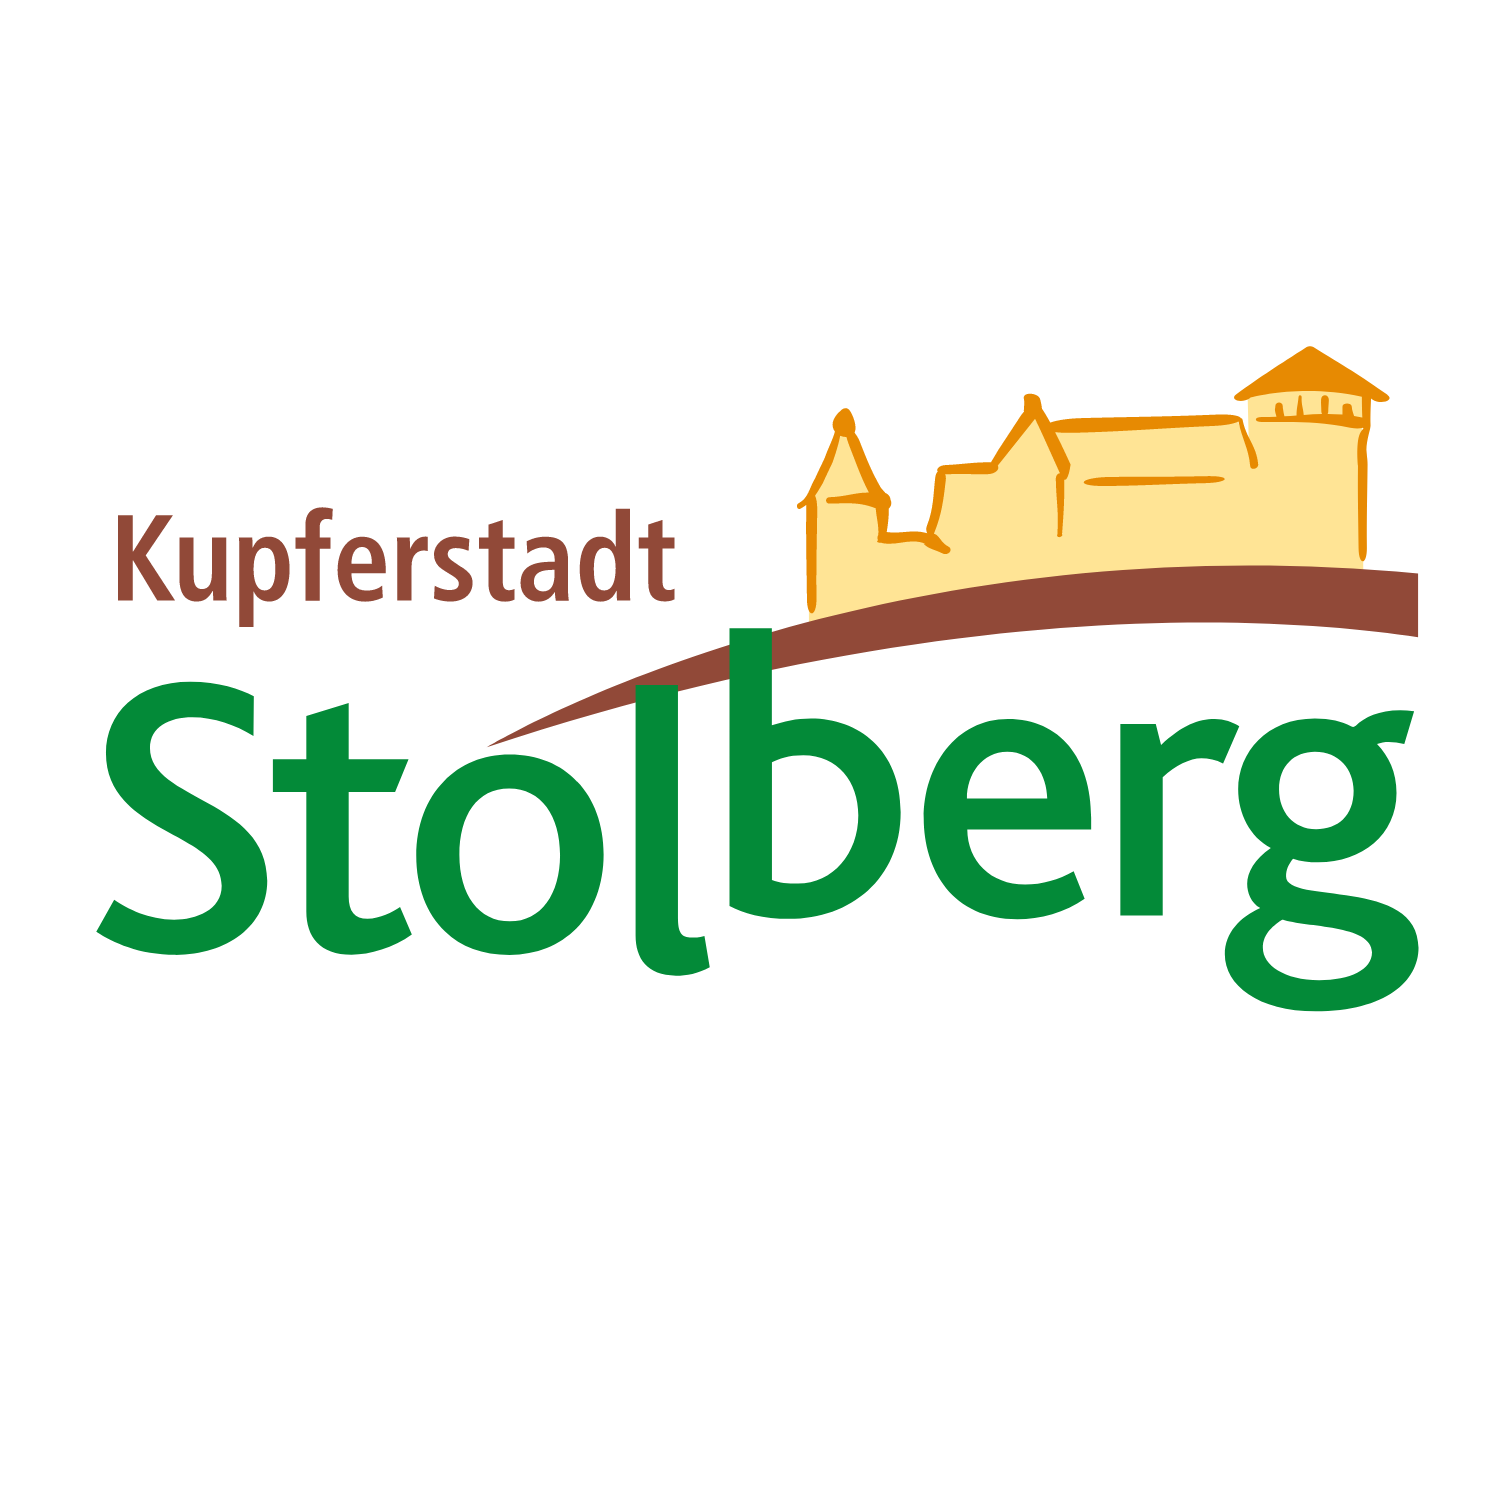 Copper town Stolberg